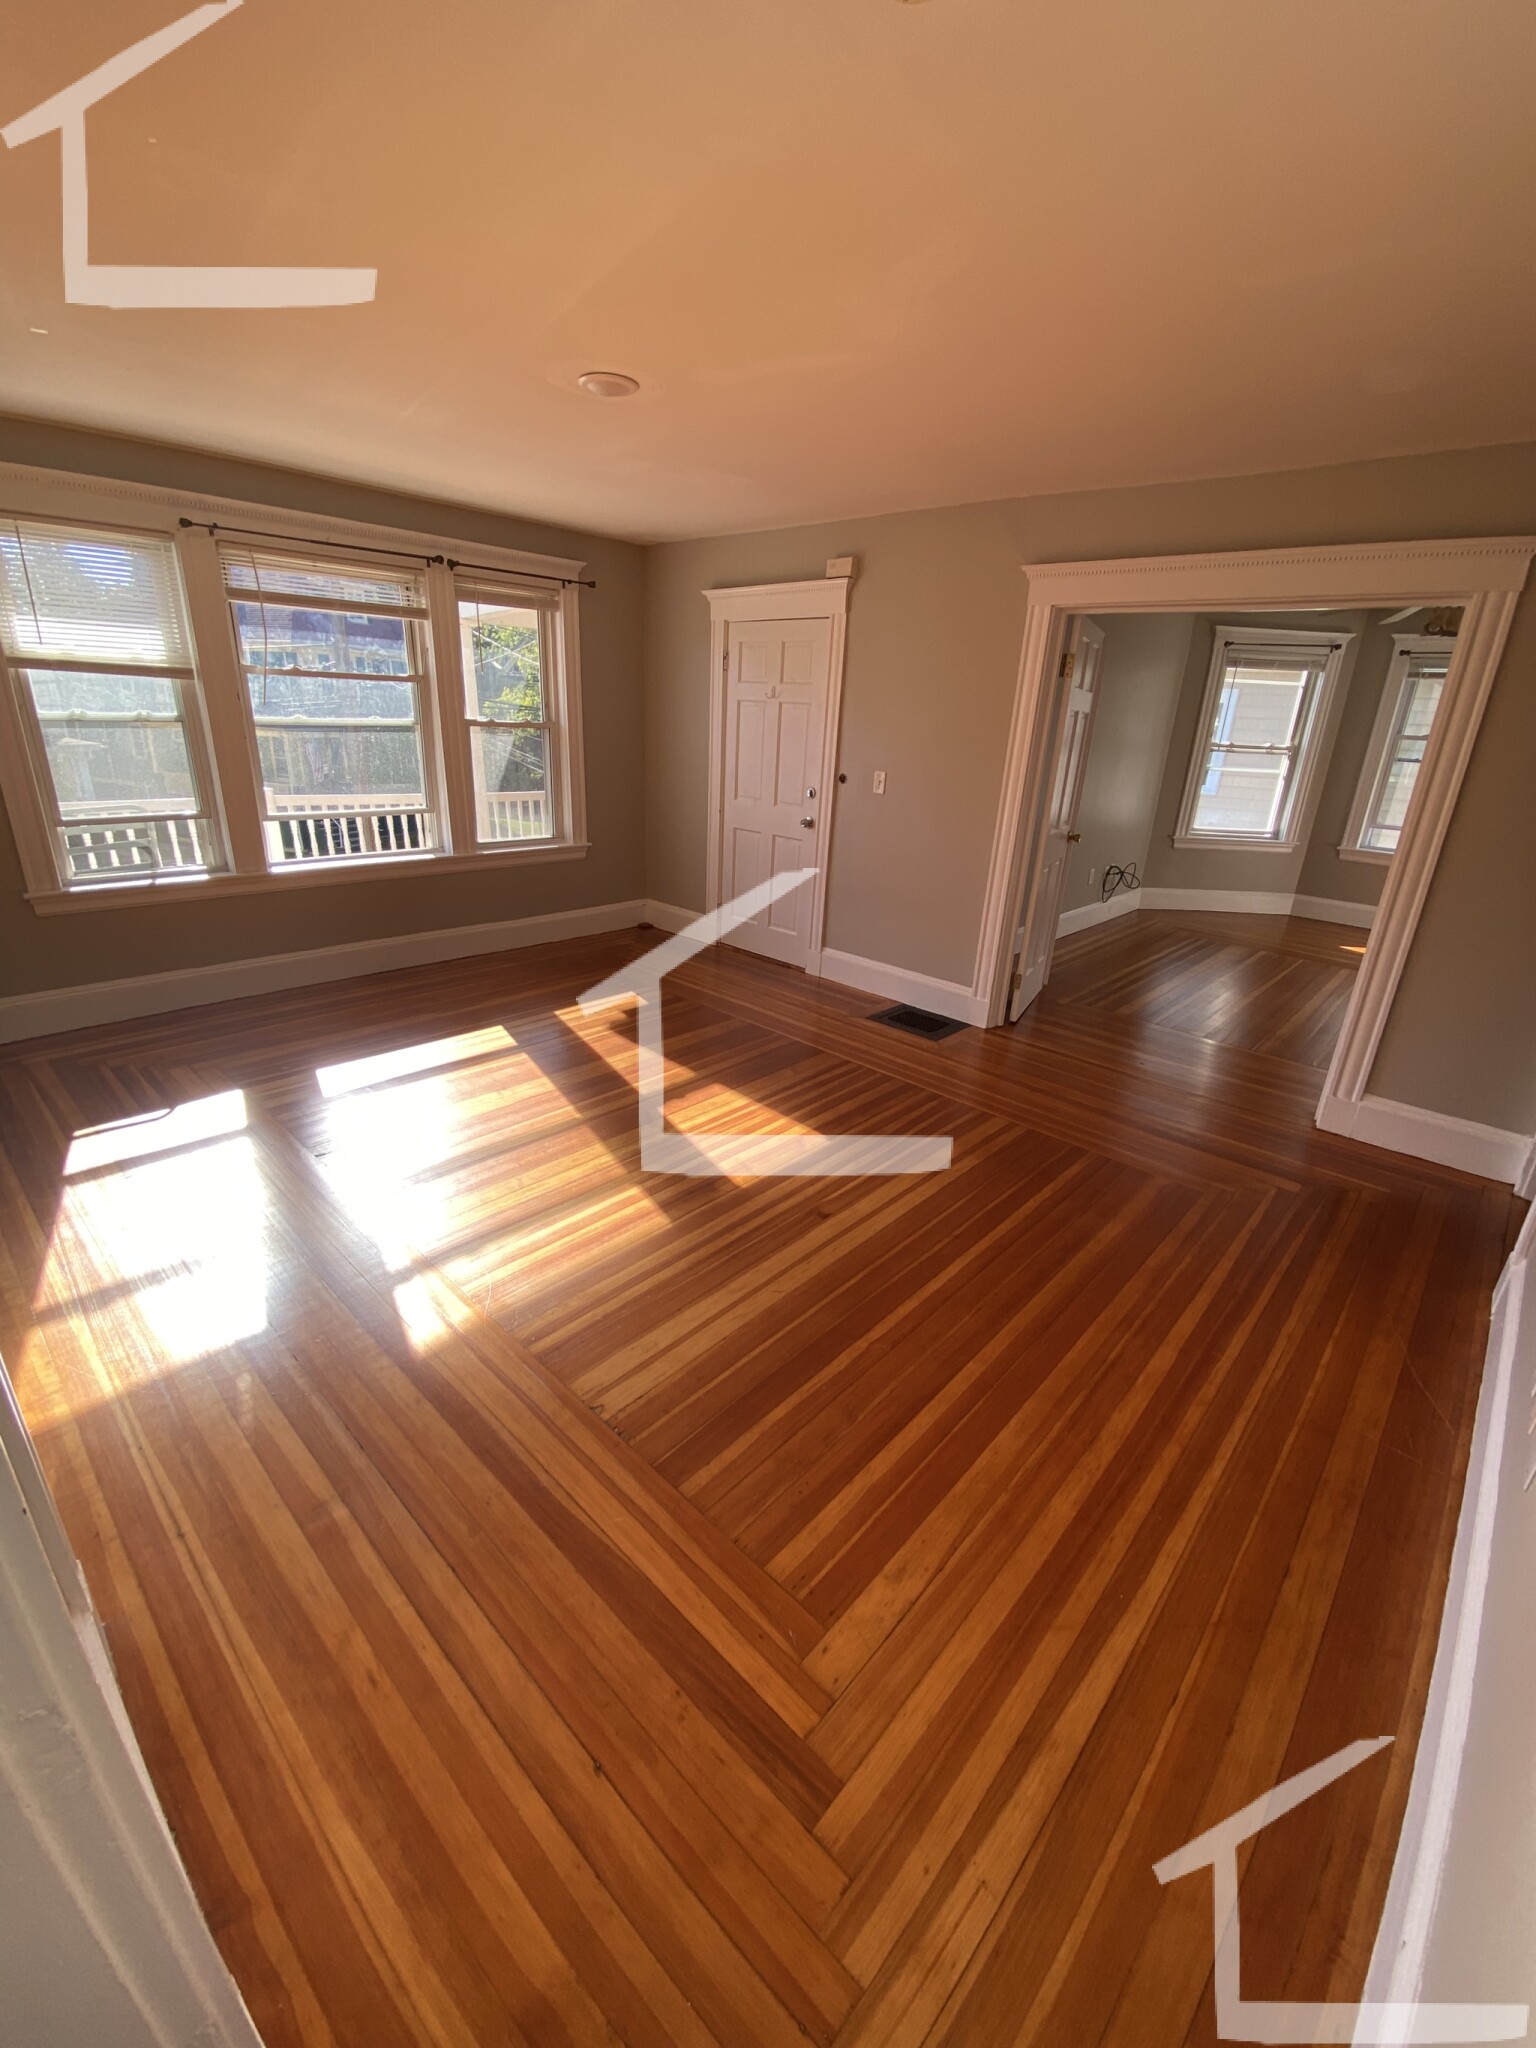 Photos of apartment on South St.,Quincy MA 02169